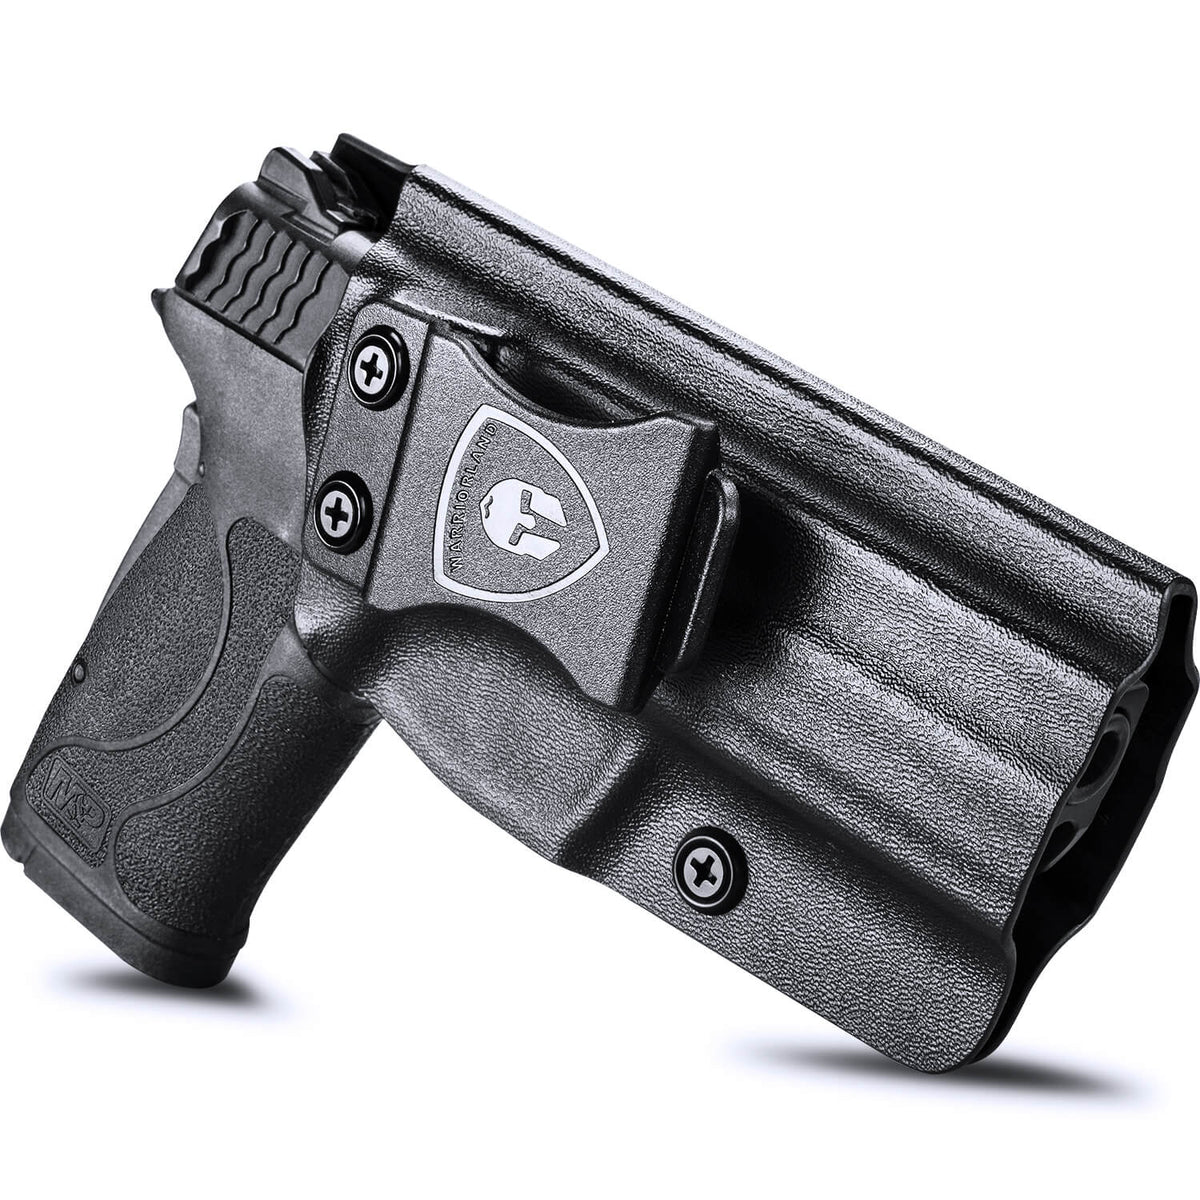 Kydex IWB Holster for Smith & Wesson M&P Shield 380 EZ Concealed Carry Right/ Left Handed | WARRIORLAND